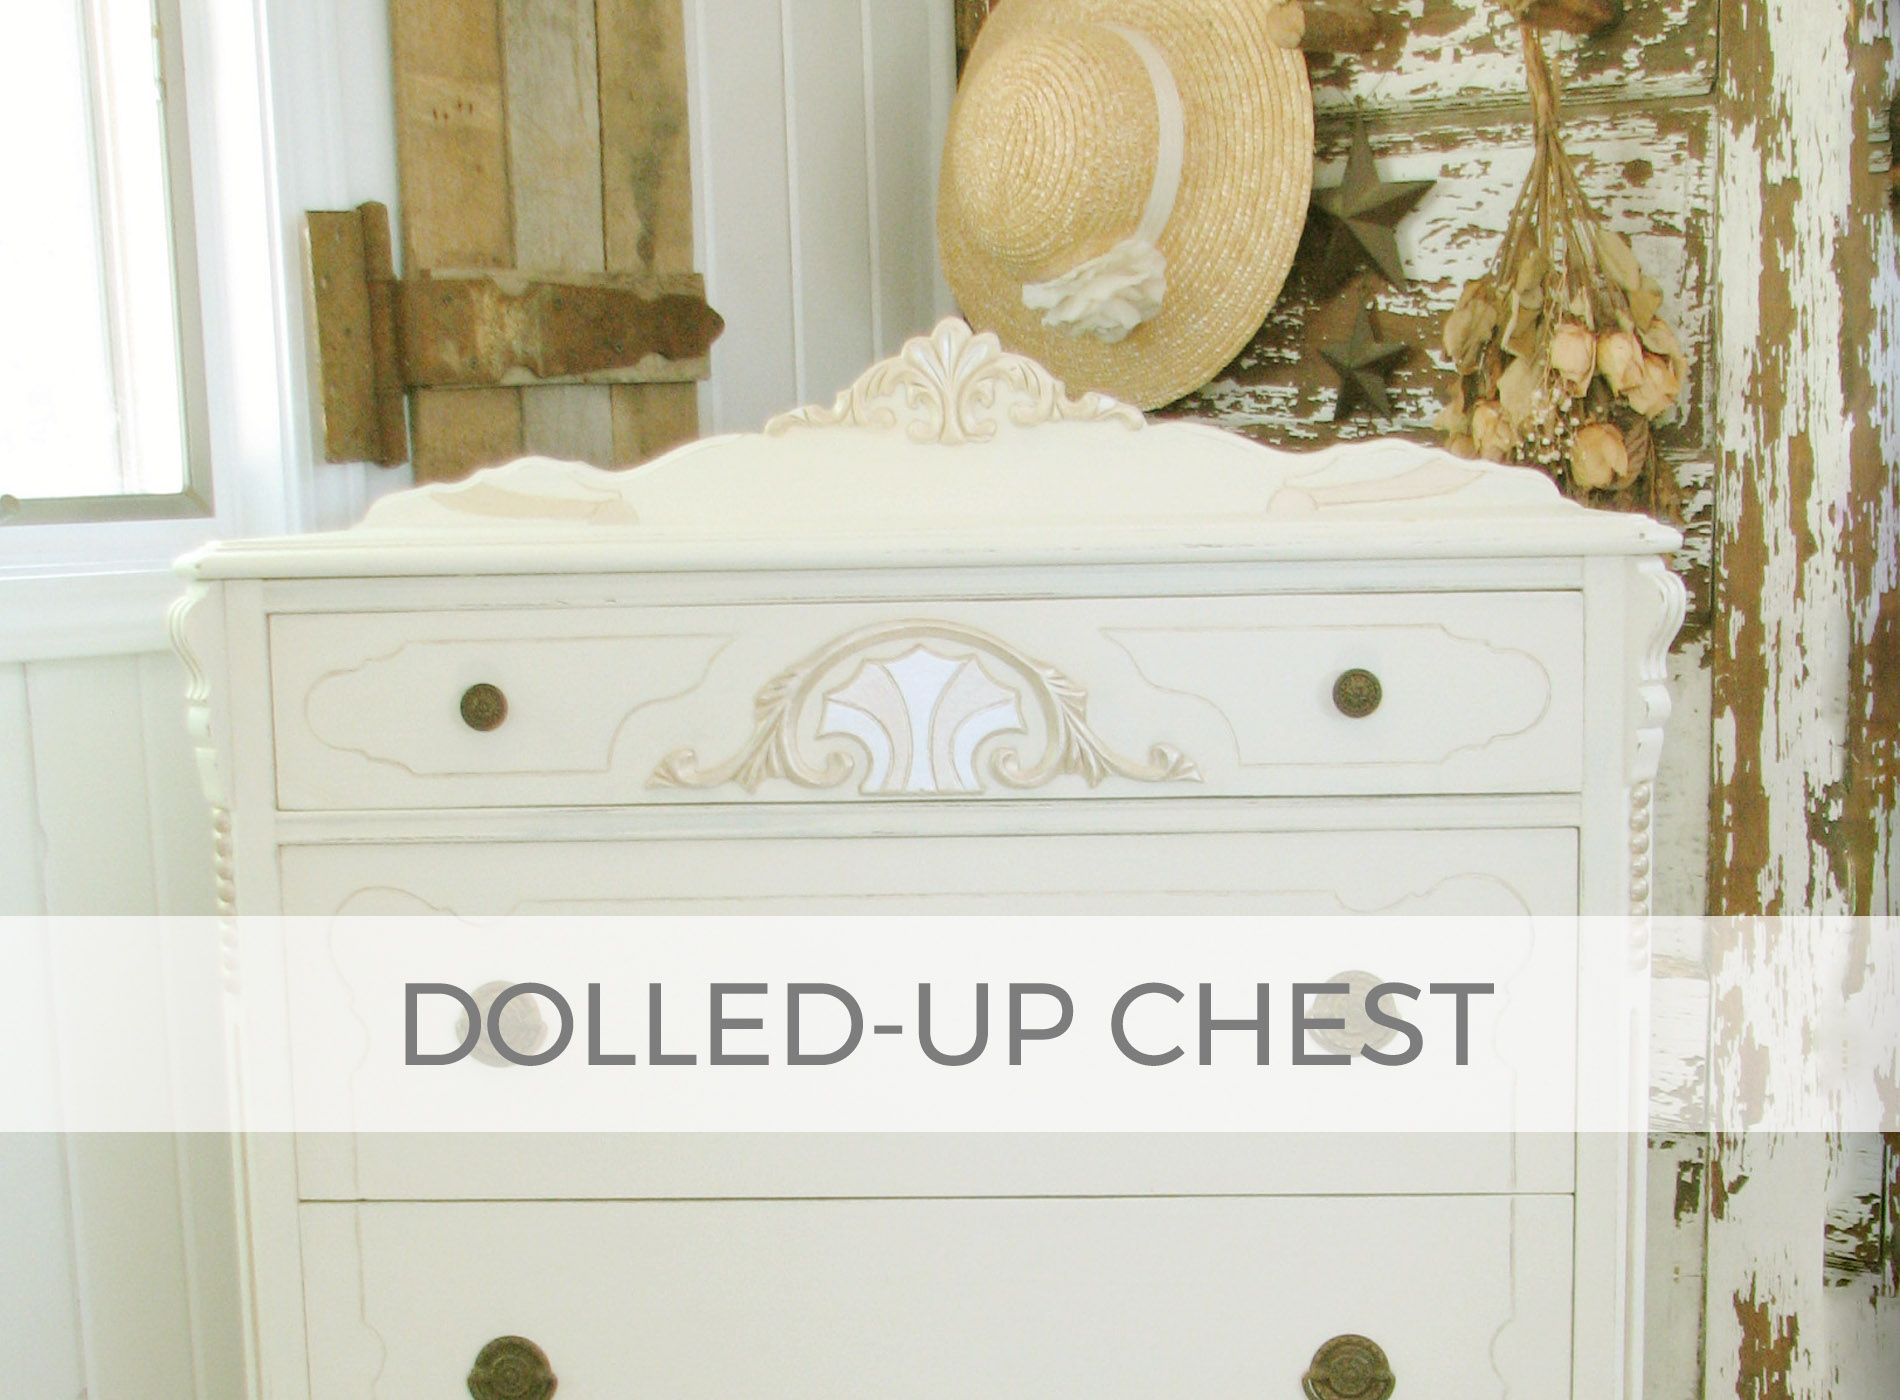 Antique Chest of Drawers all dolled-up by Larissa of Prodigal Pieces | prodigalpieces.com #prodigalpieces